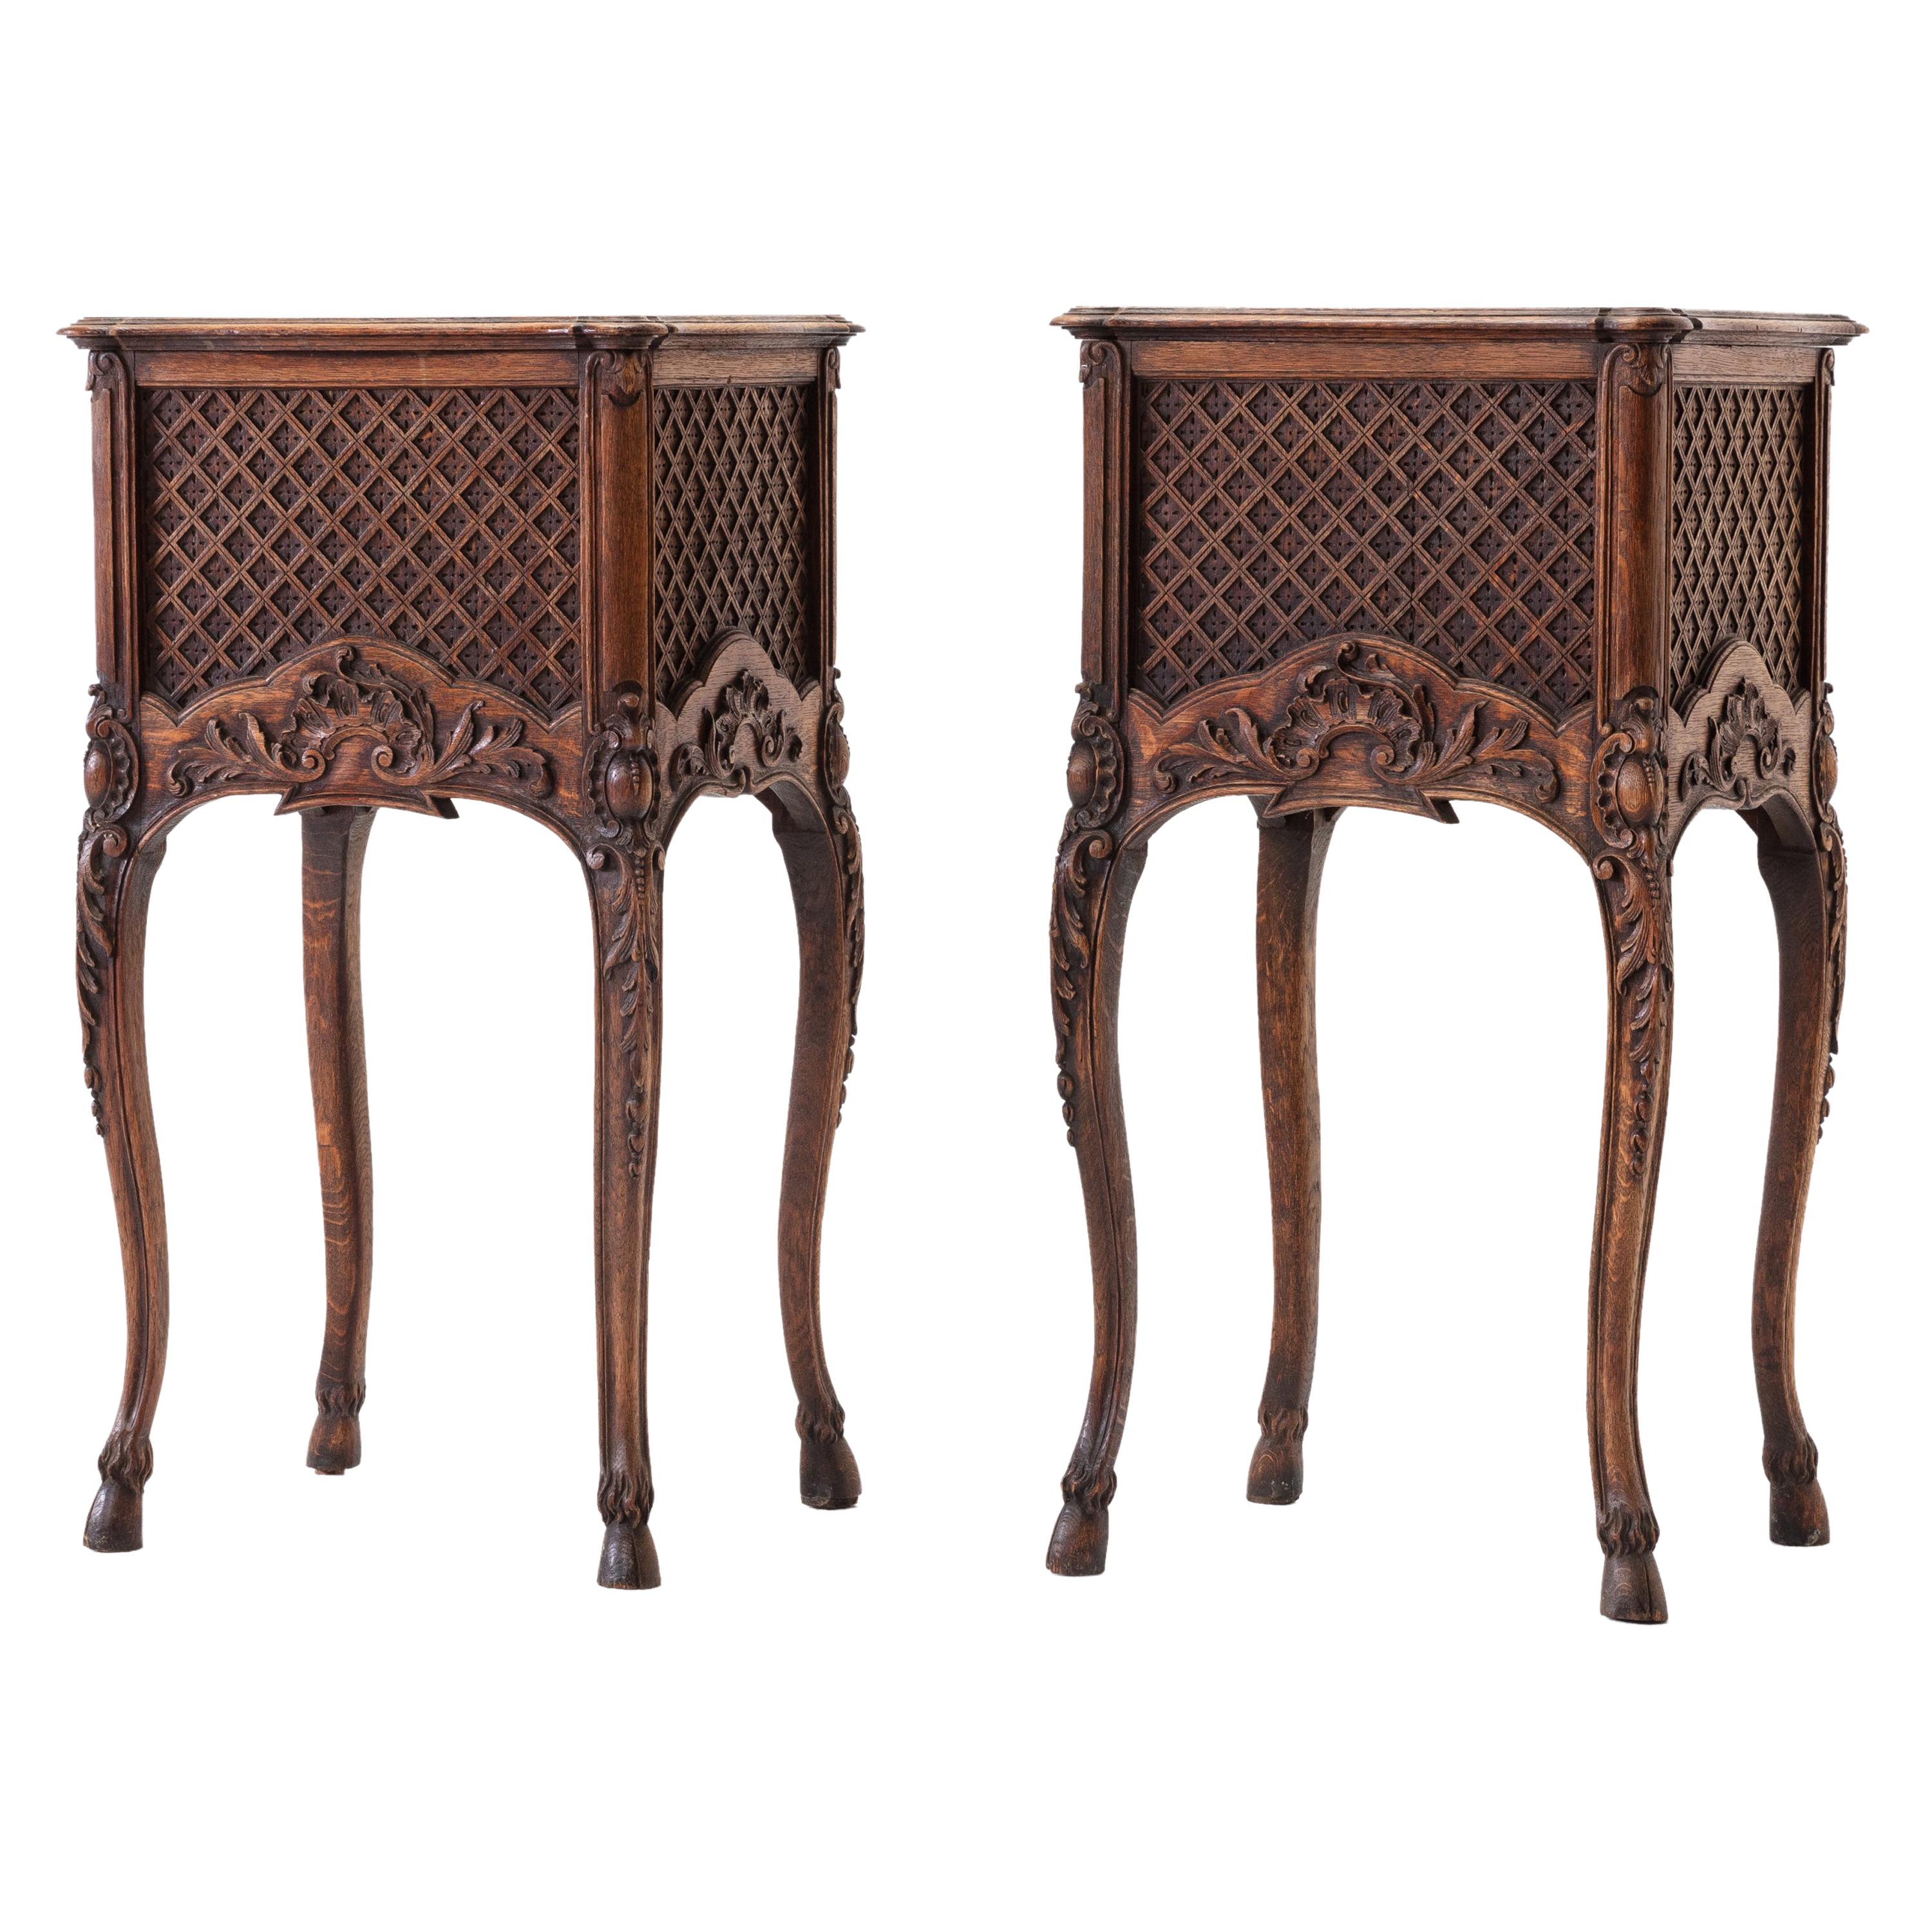 Pair of 19th Century French Oak Bedside Tables